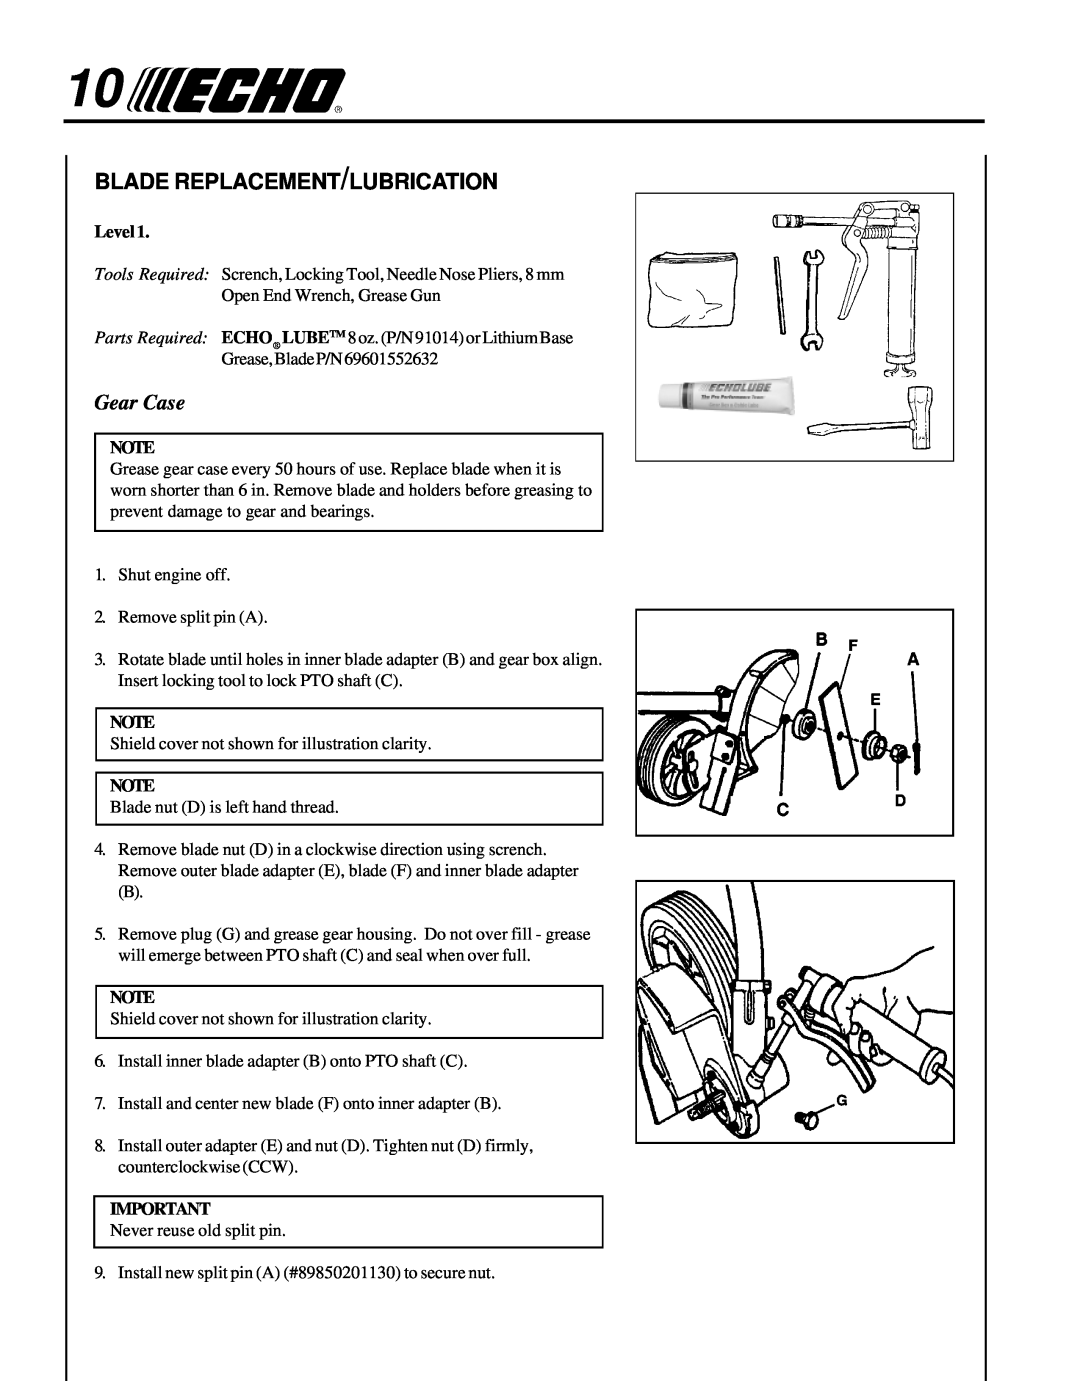 Echo 99944200470 manual Blade Replacement/Lubrication, Gear Case, Level 